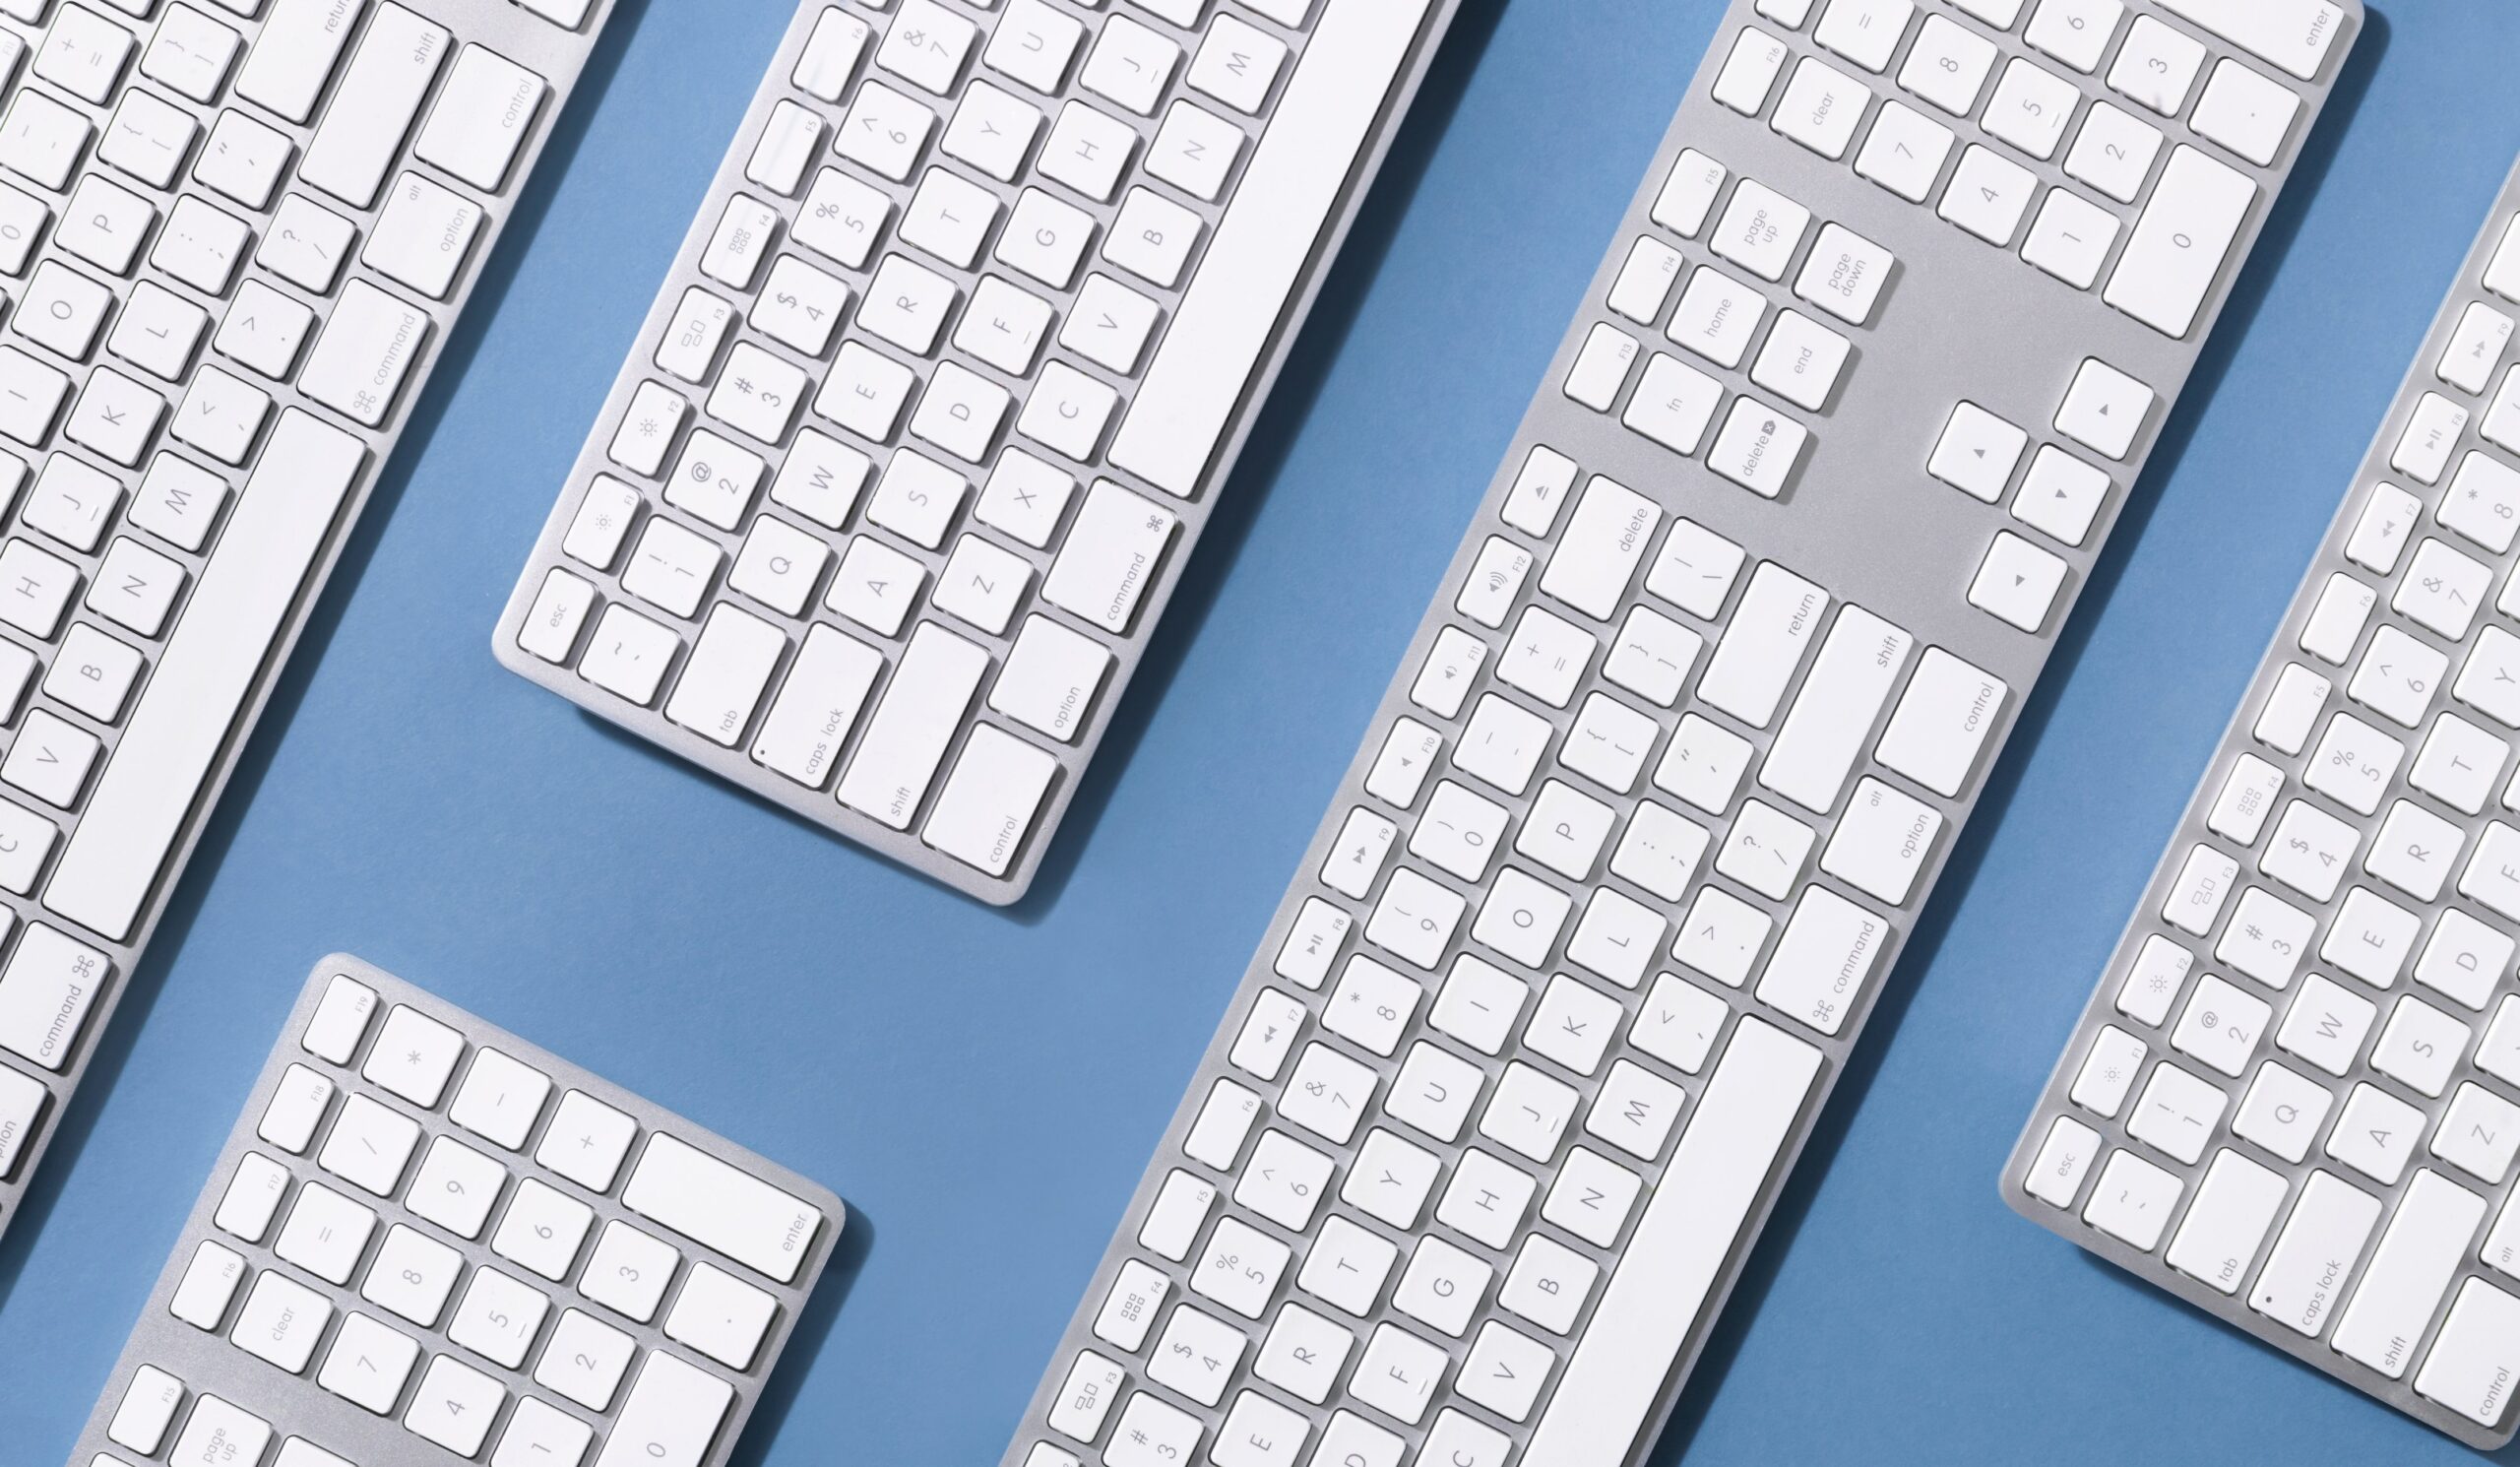 Keyboards on blue surface